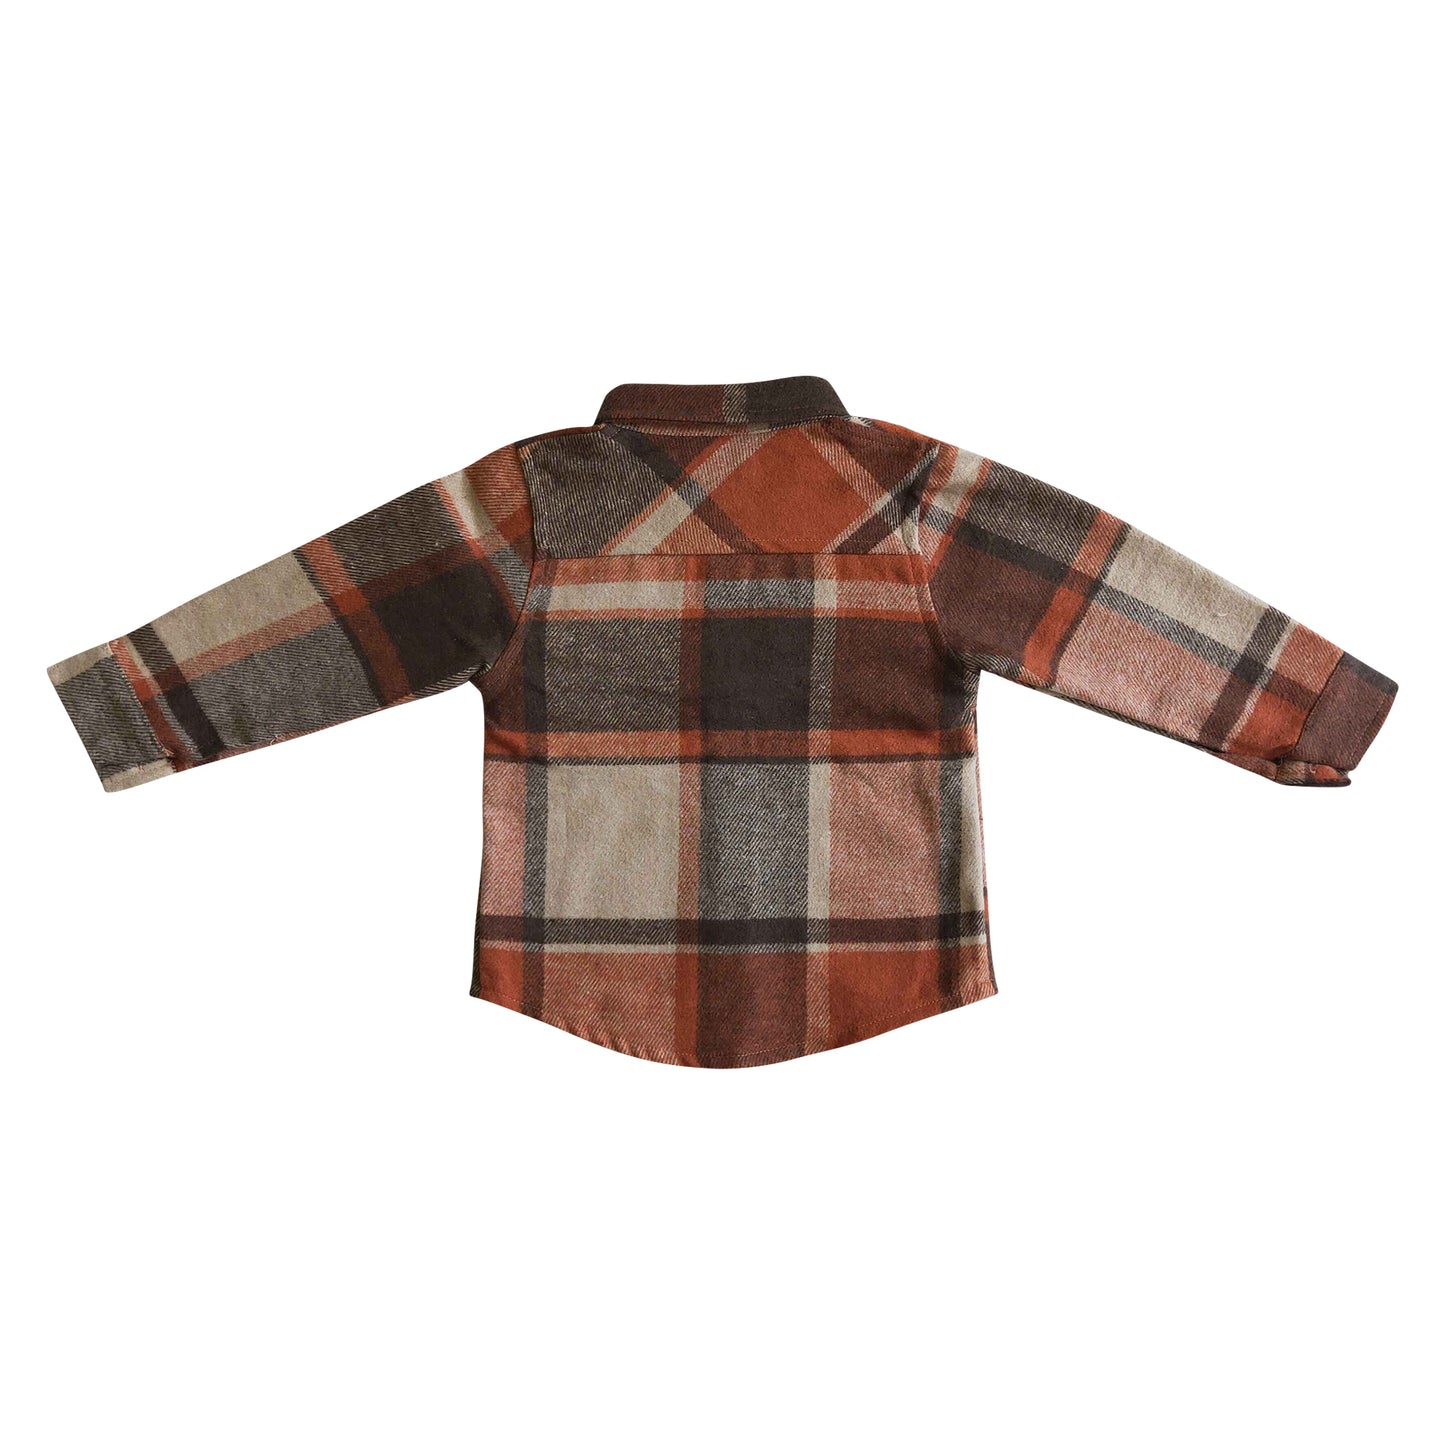 children's clothing boy flannel fall color plaid button shirt with pocket